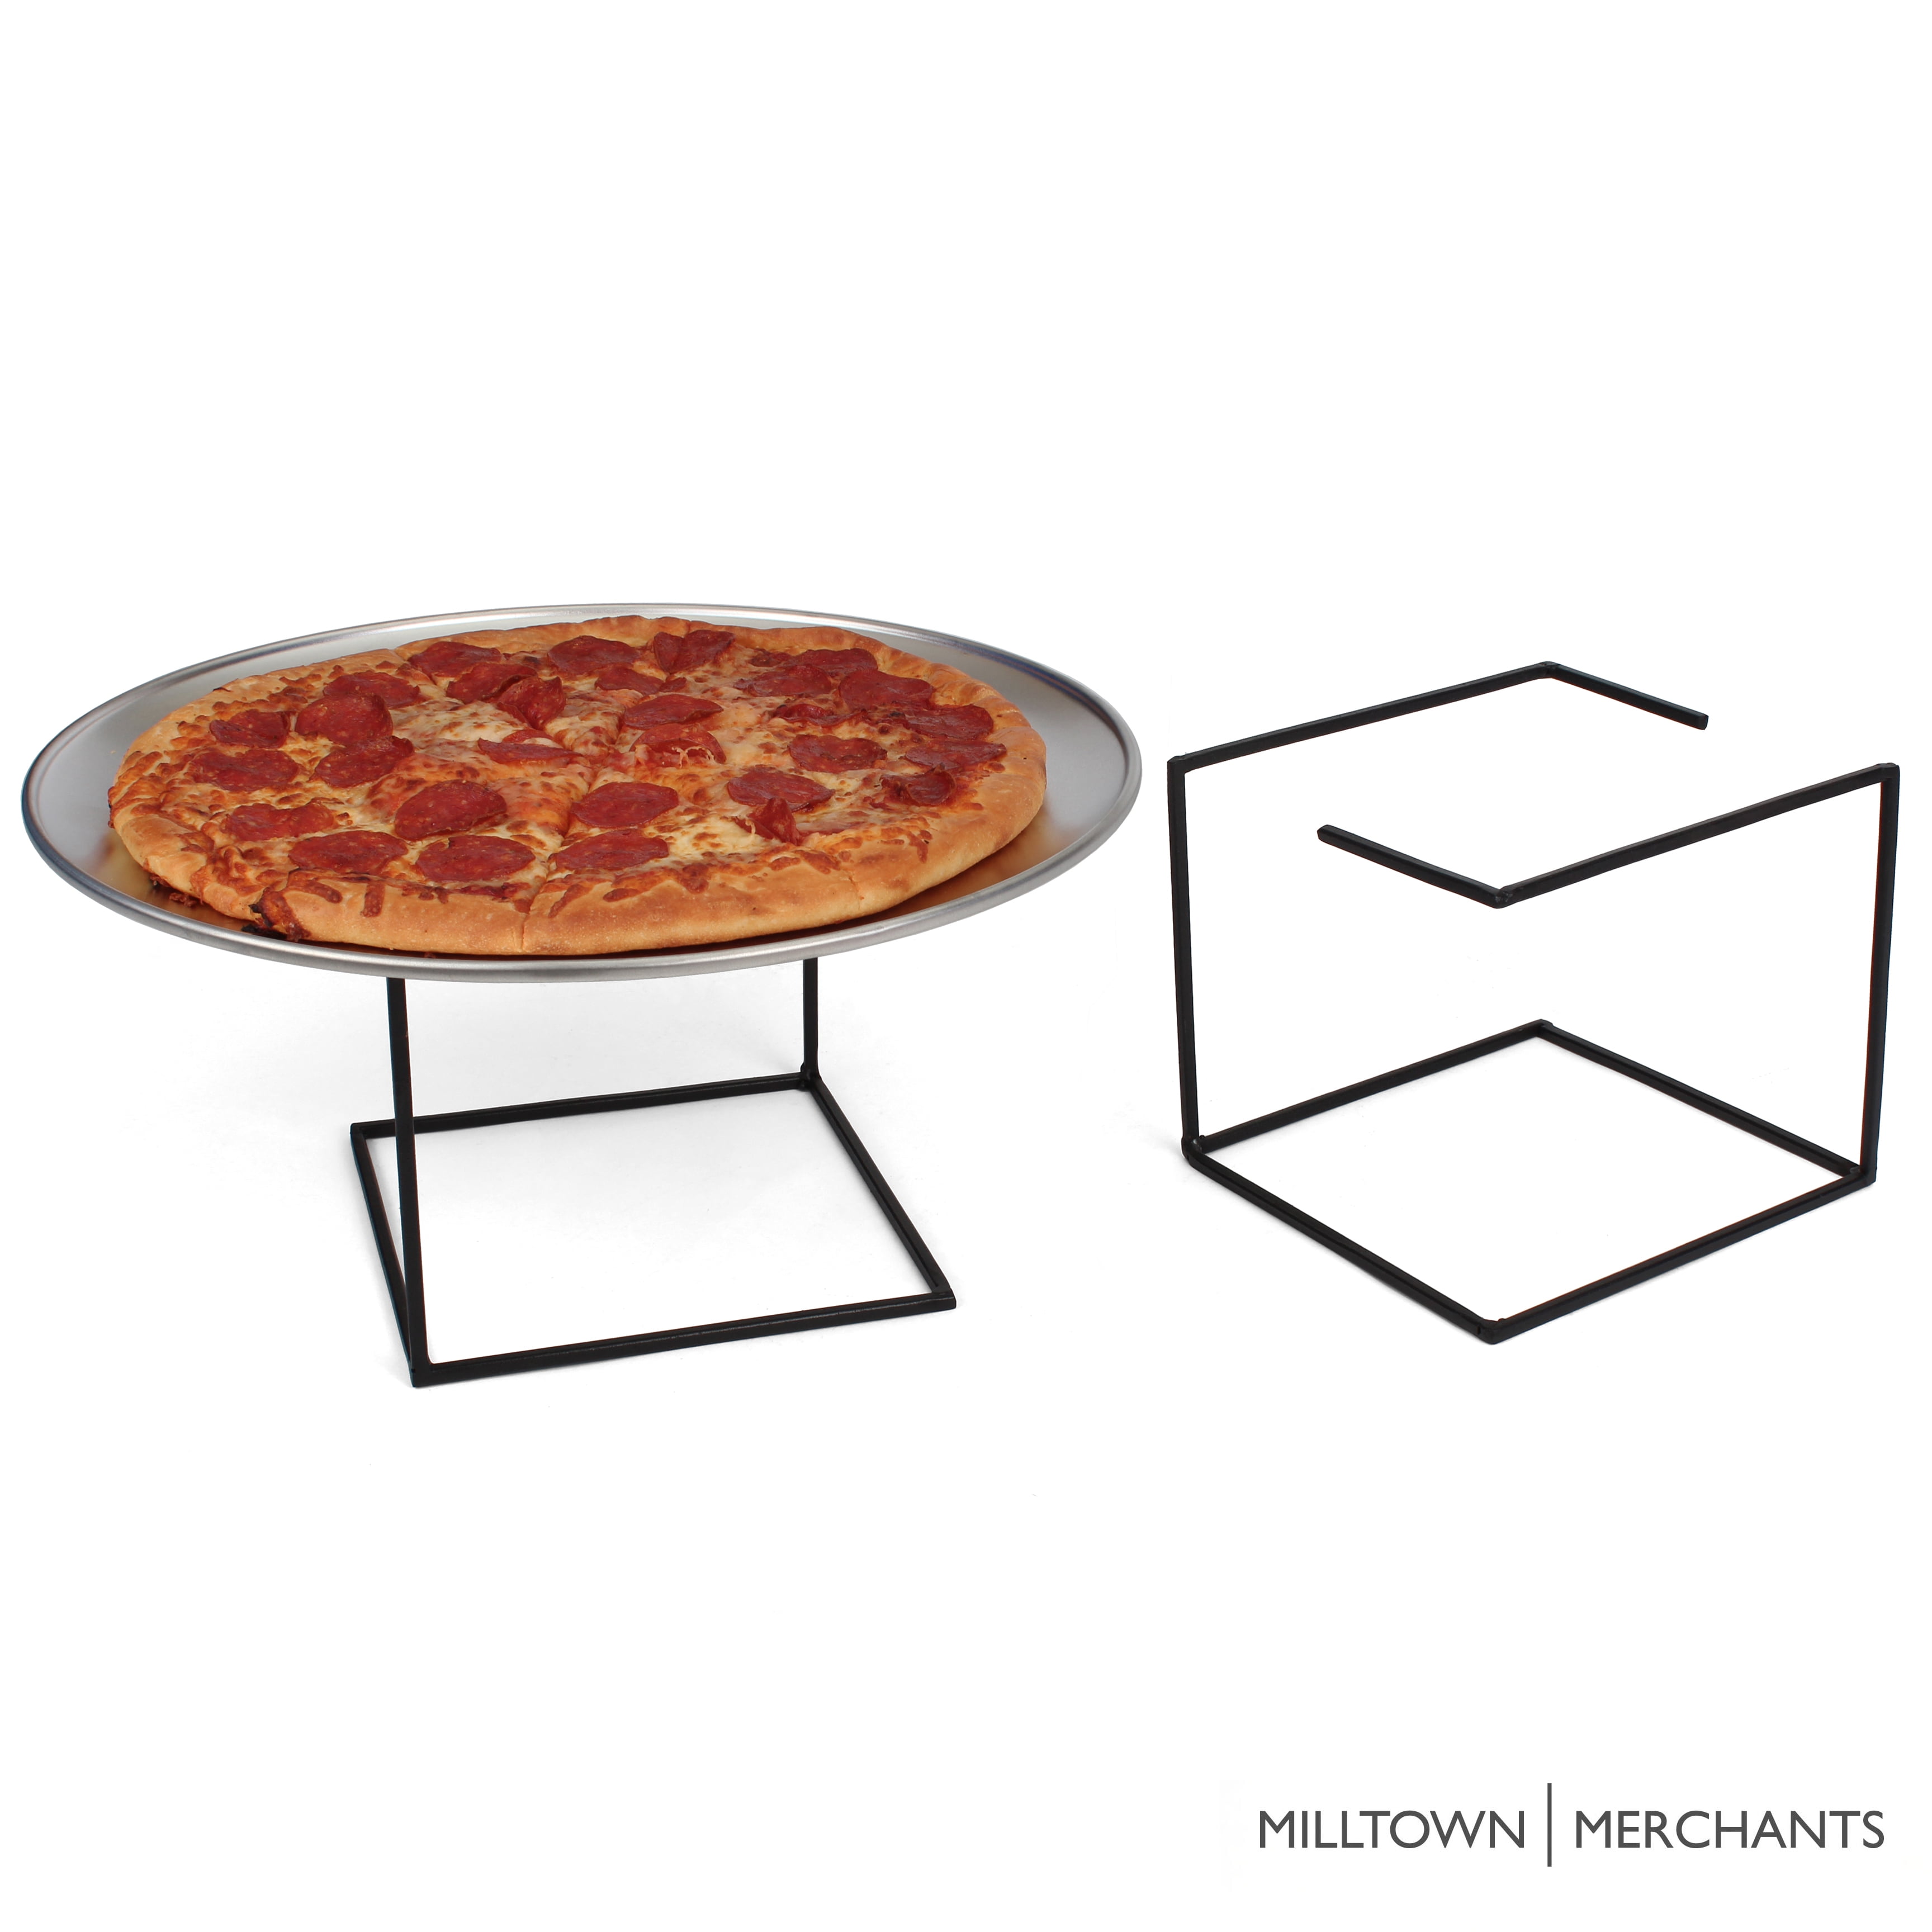 Dishes Merchants Holder - Stand Pizzas, Metal and Pan Tray Tabletop Risers - Pizza for Pizza Milltown Platters,